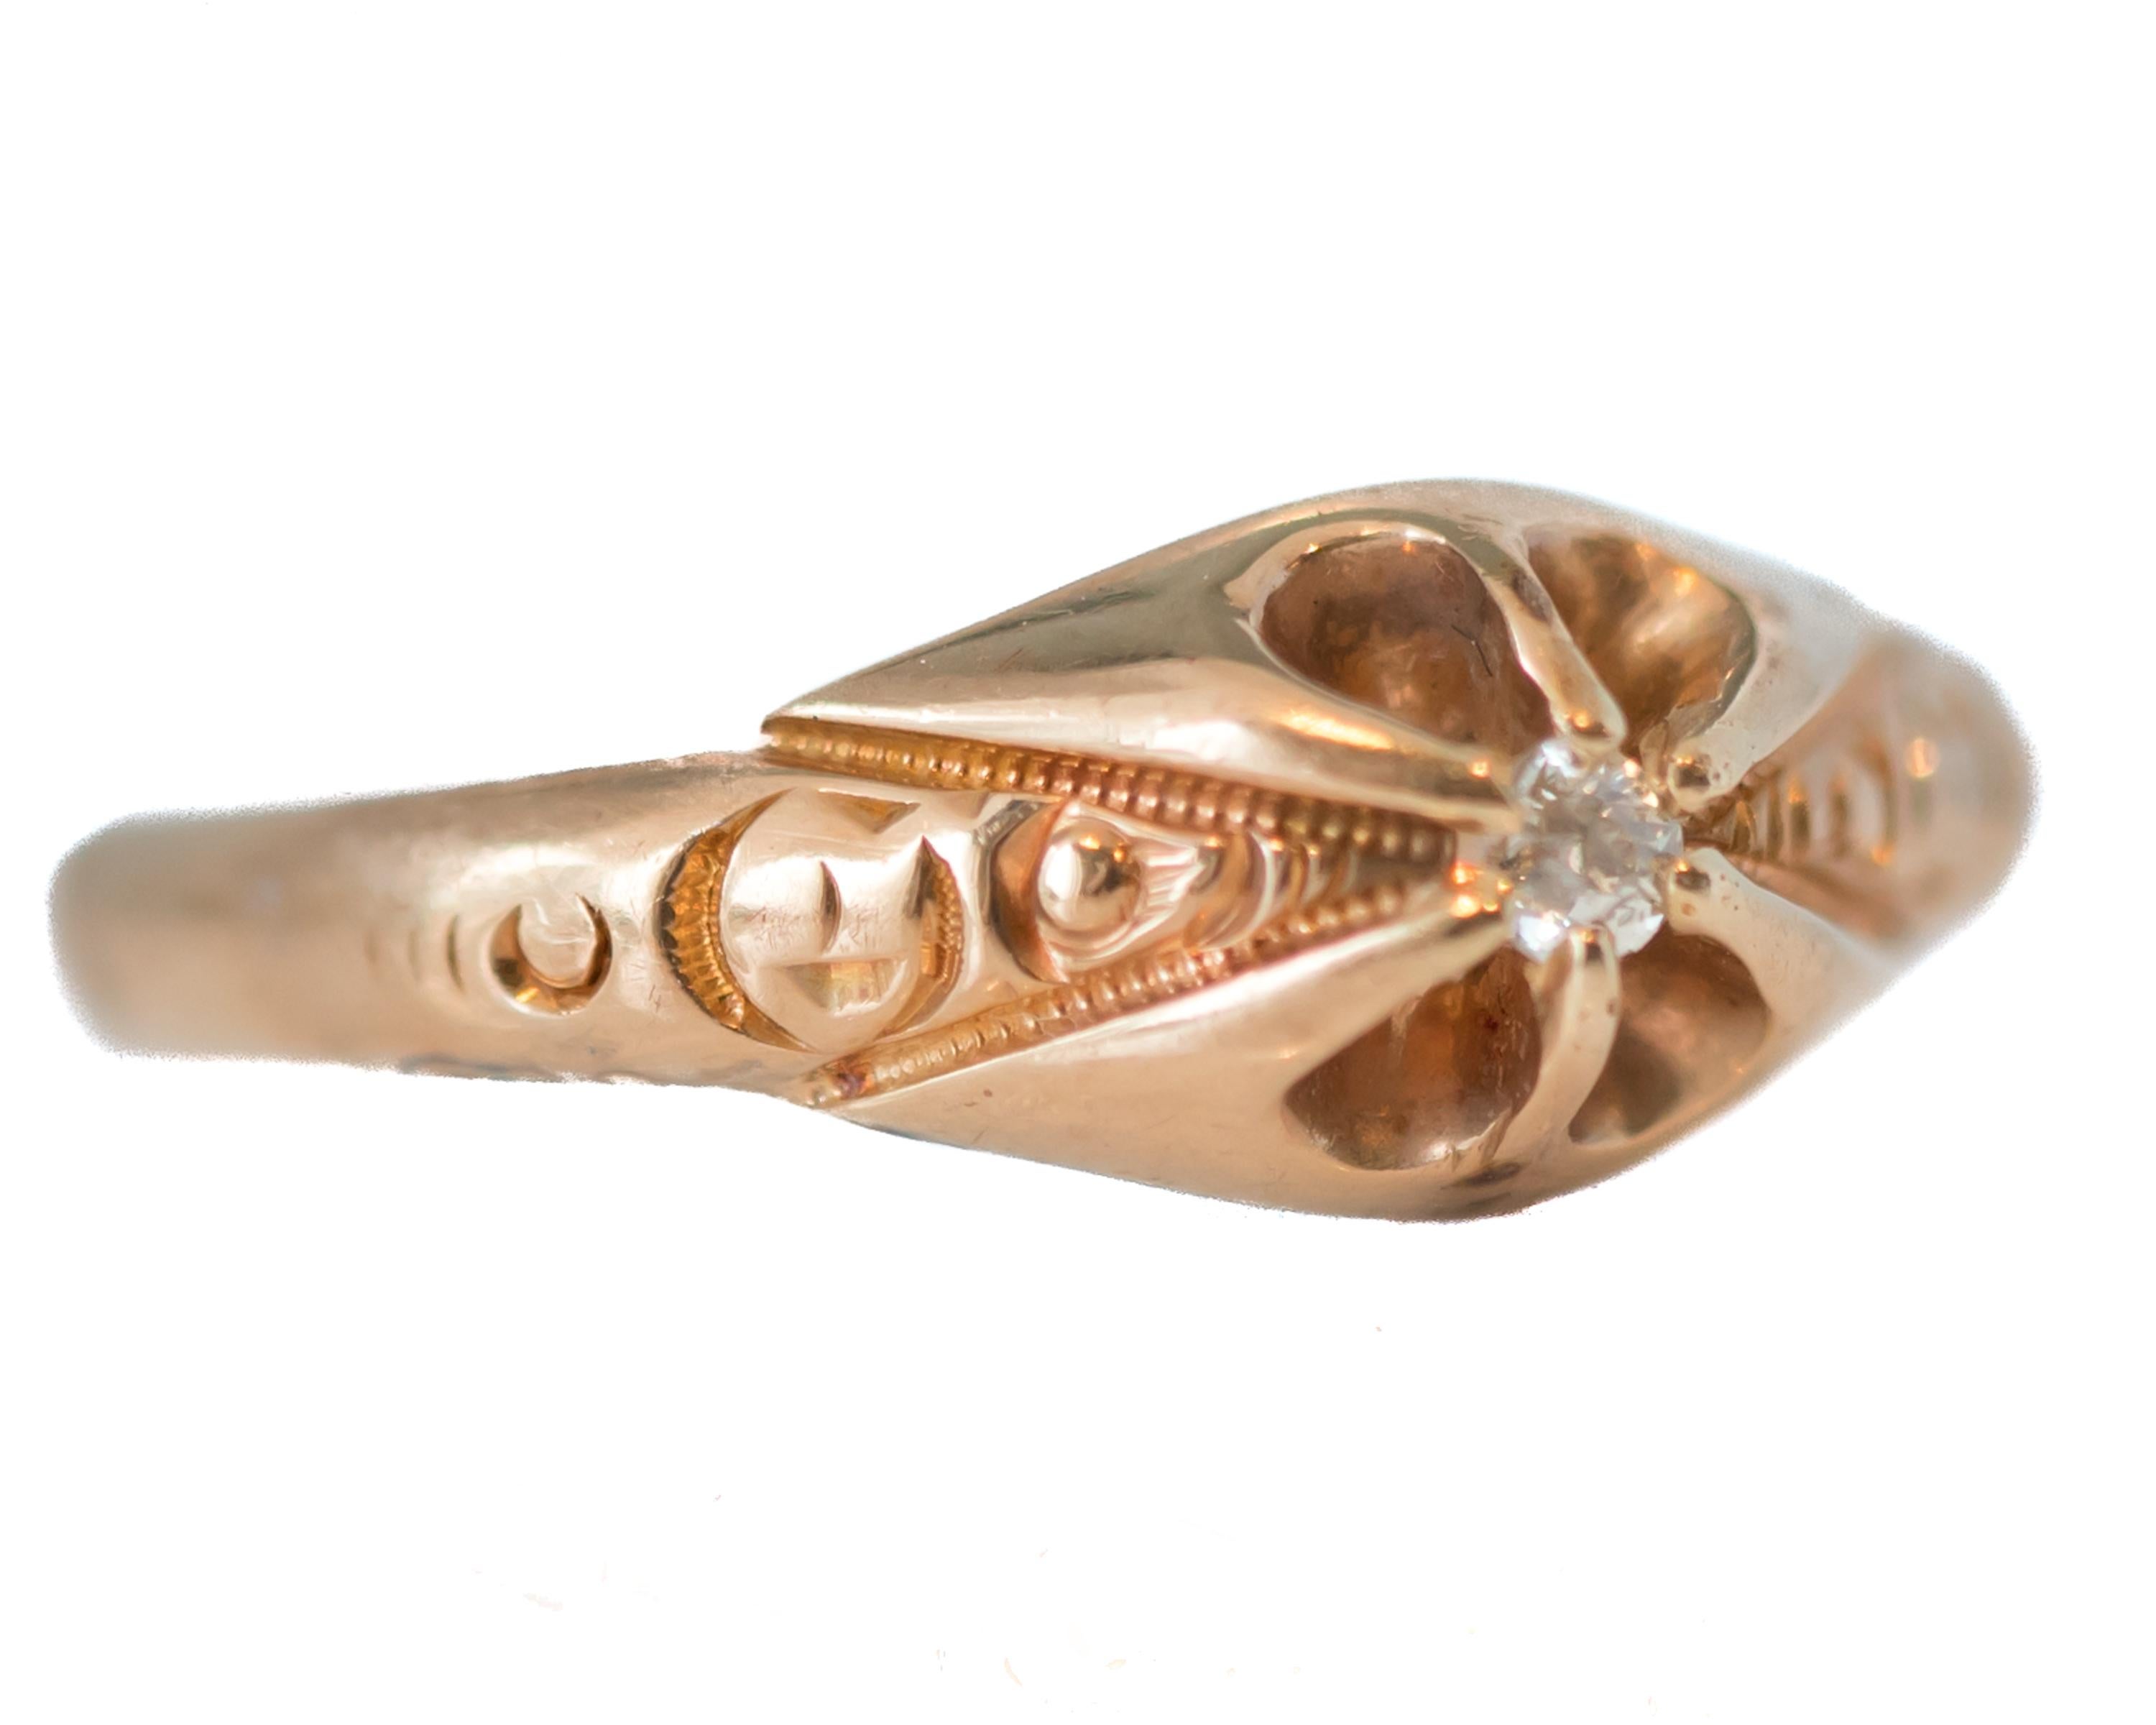 Art Deco Rose Gold Diamond Ring - 14 Karat Rose Gold, Diamond 

Features:
Sweet Star motif
Diamond accent center
14 karat Rose Gold
Cathedral inspired setting
Ring face measures 6.5 millimeters from top to bottom
Finger to top of stone measures 3.5